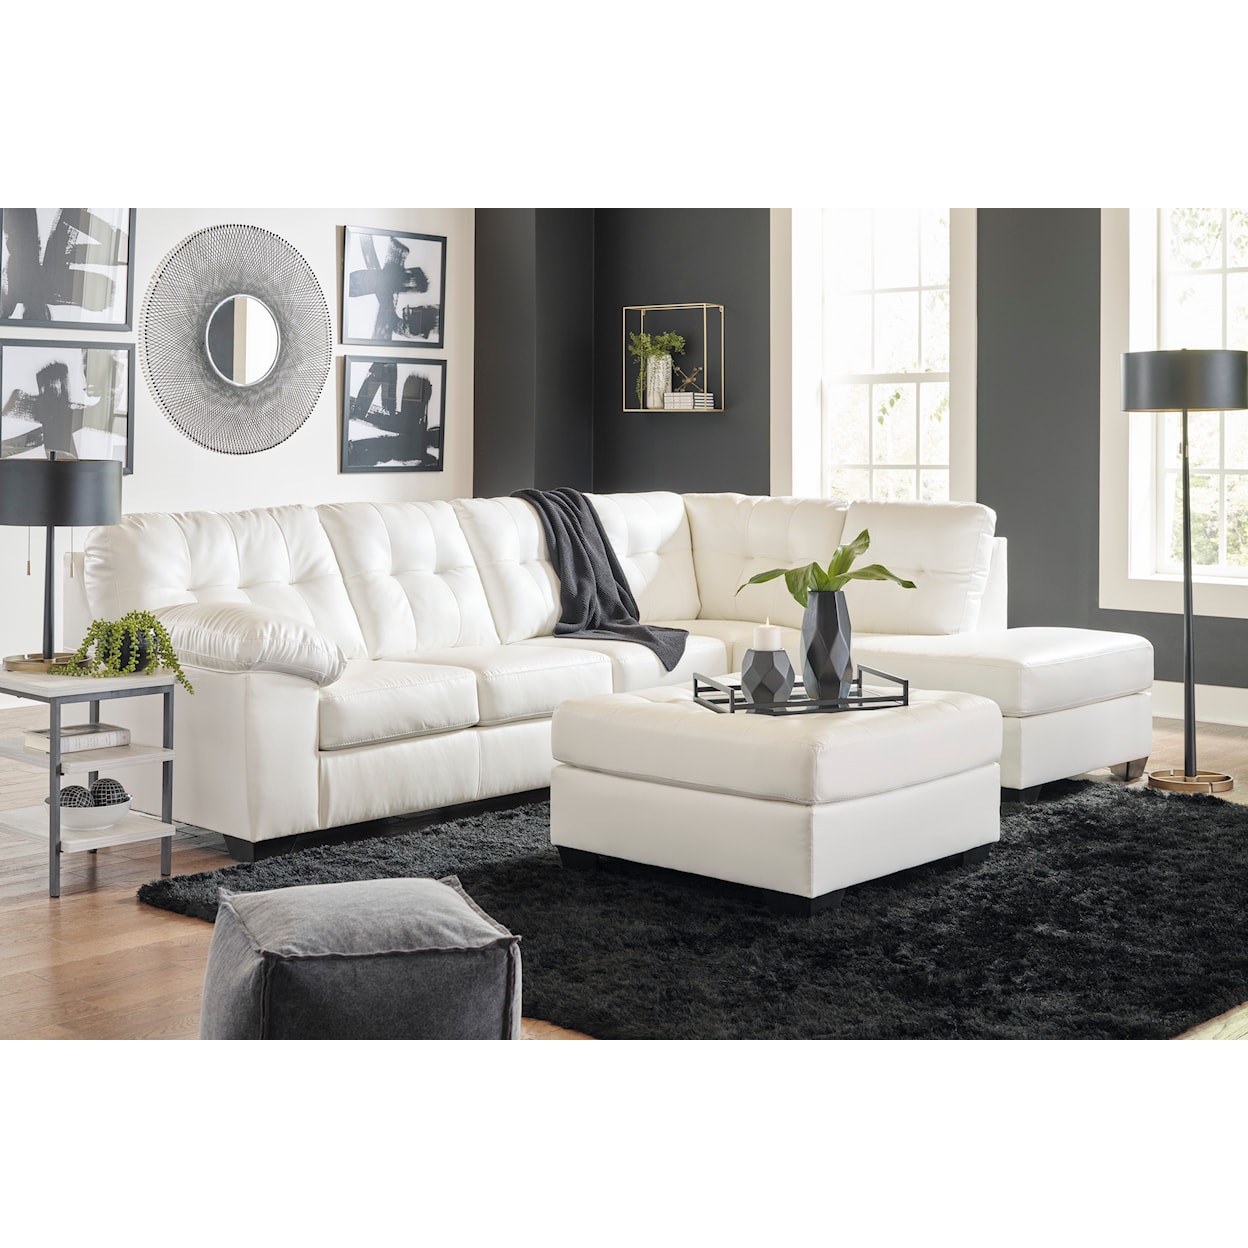 Benchcraft Donlen Sectional and Ottoman